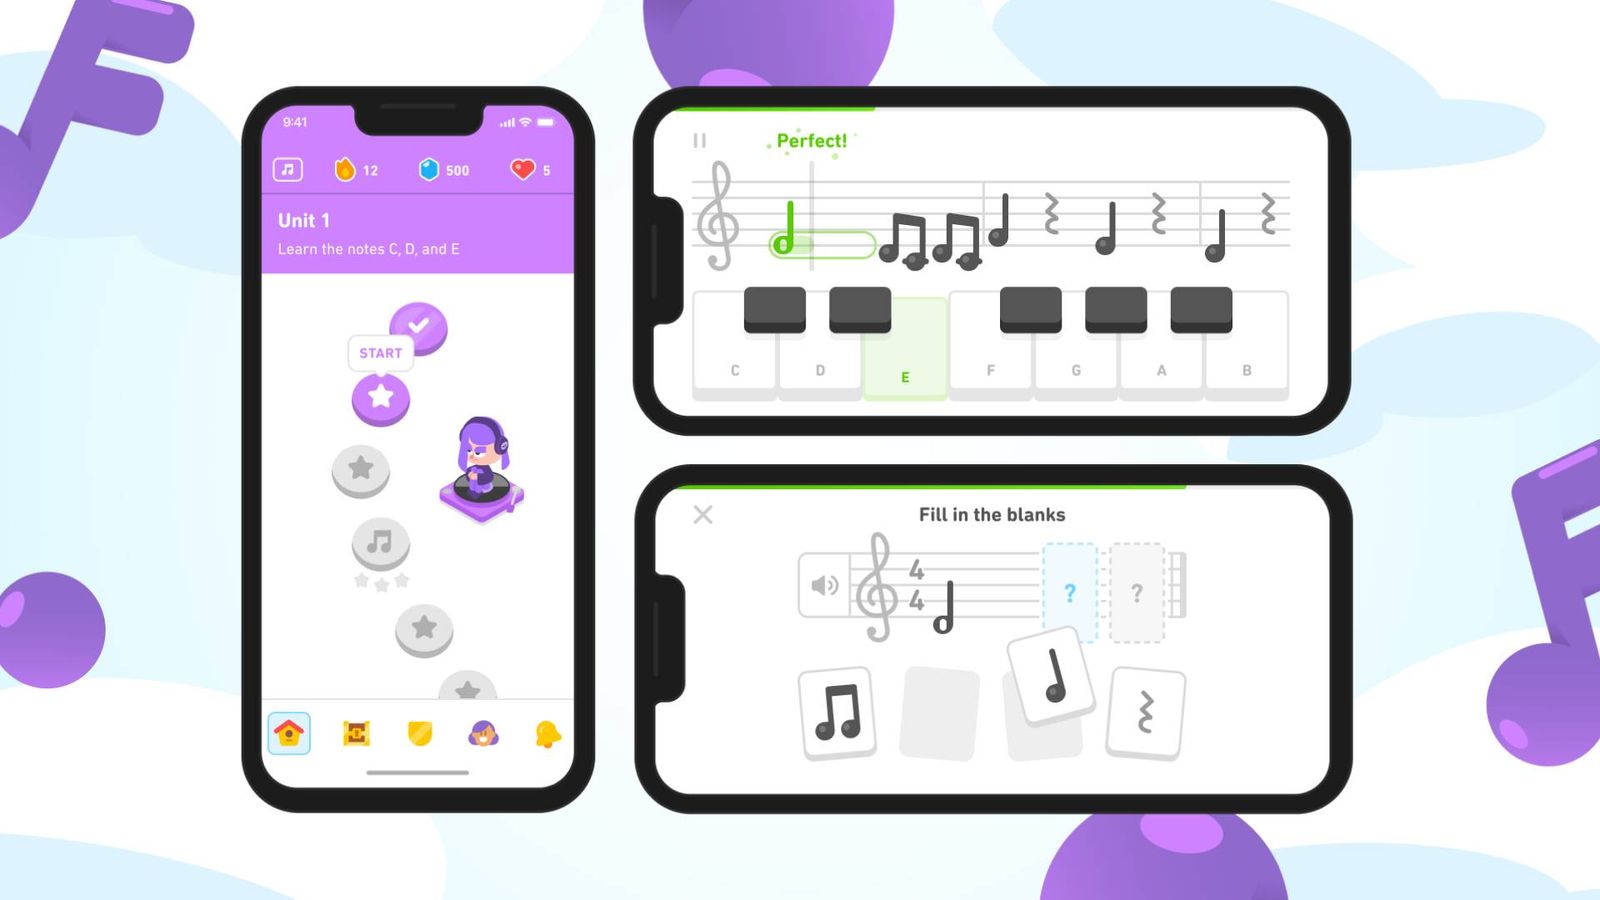 Duolingo Music release date - An image of the interface of the Duo music course